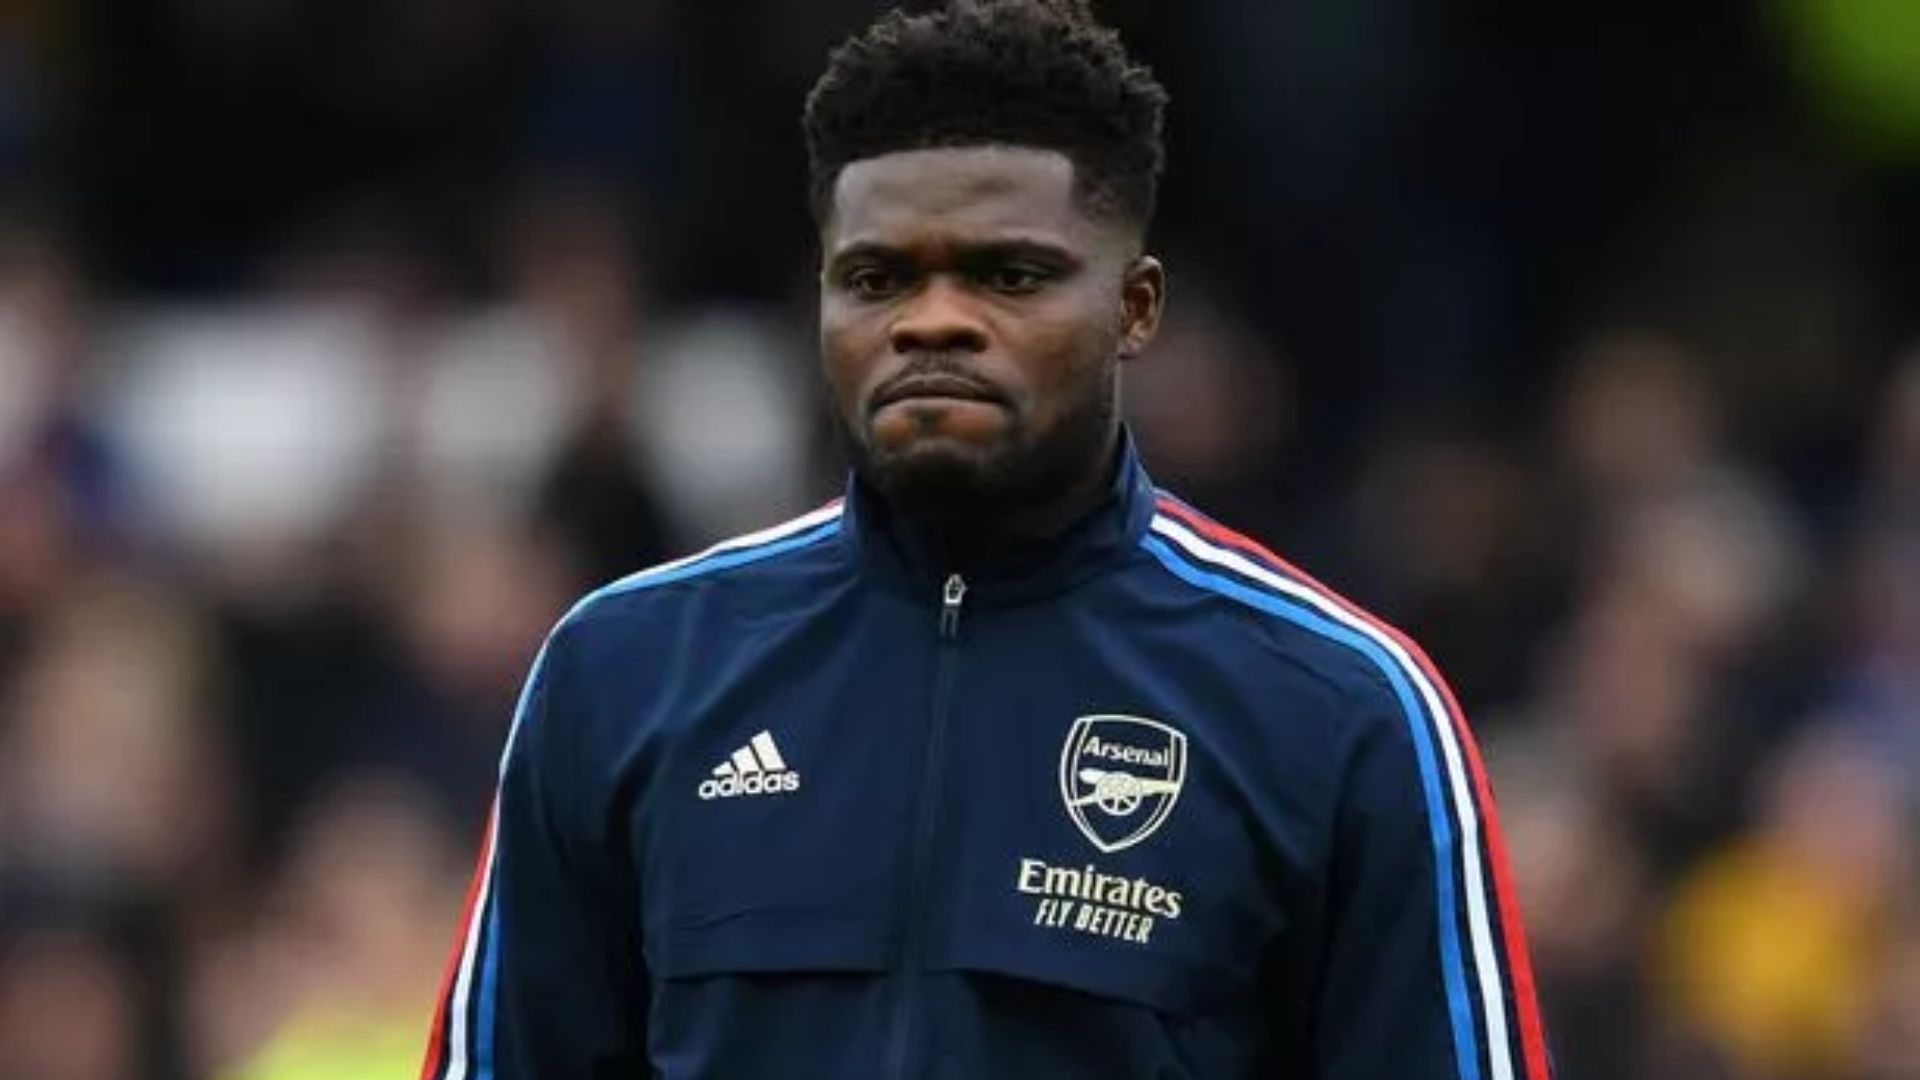 Thomas Partey is ruled out 'for a while' for Arsenal's match against Manchester United due to injury.